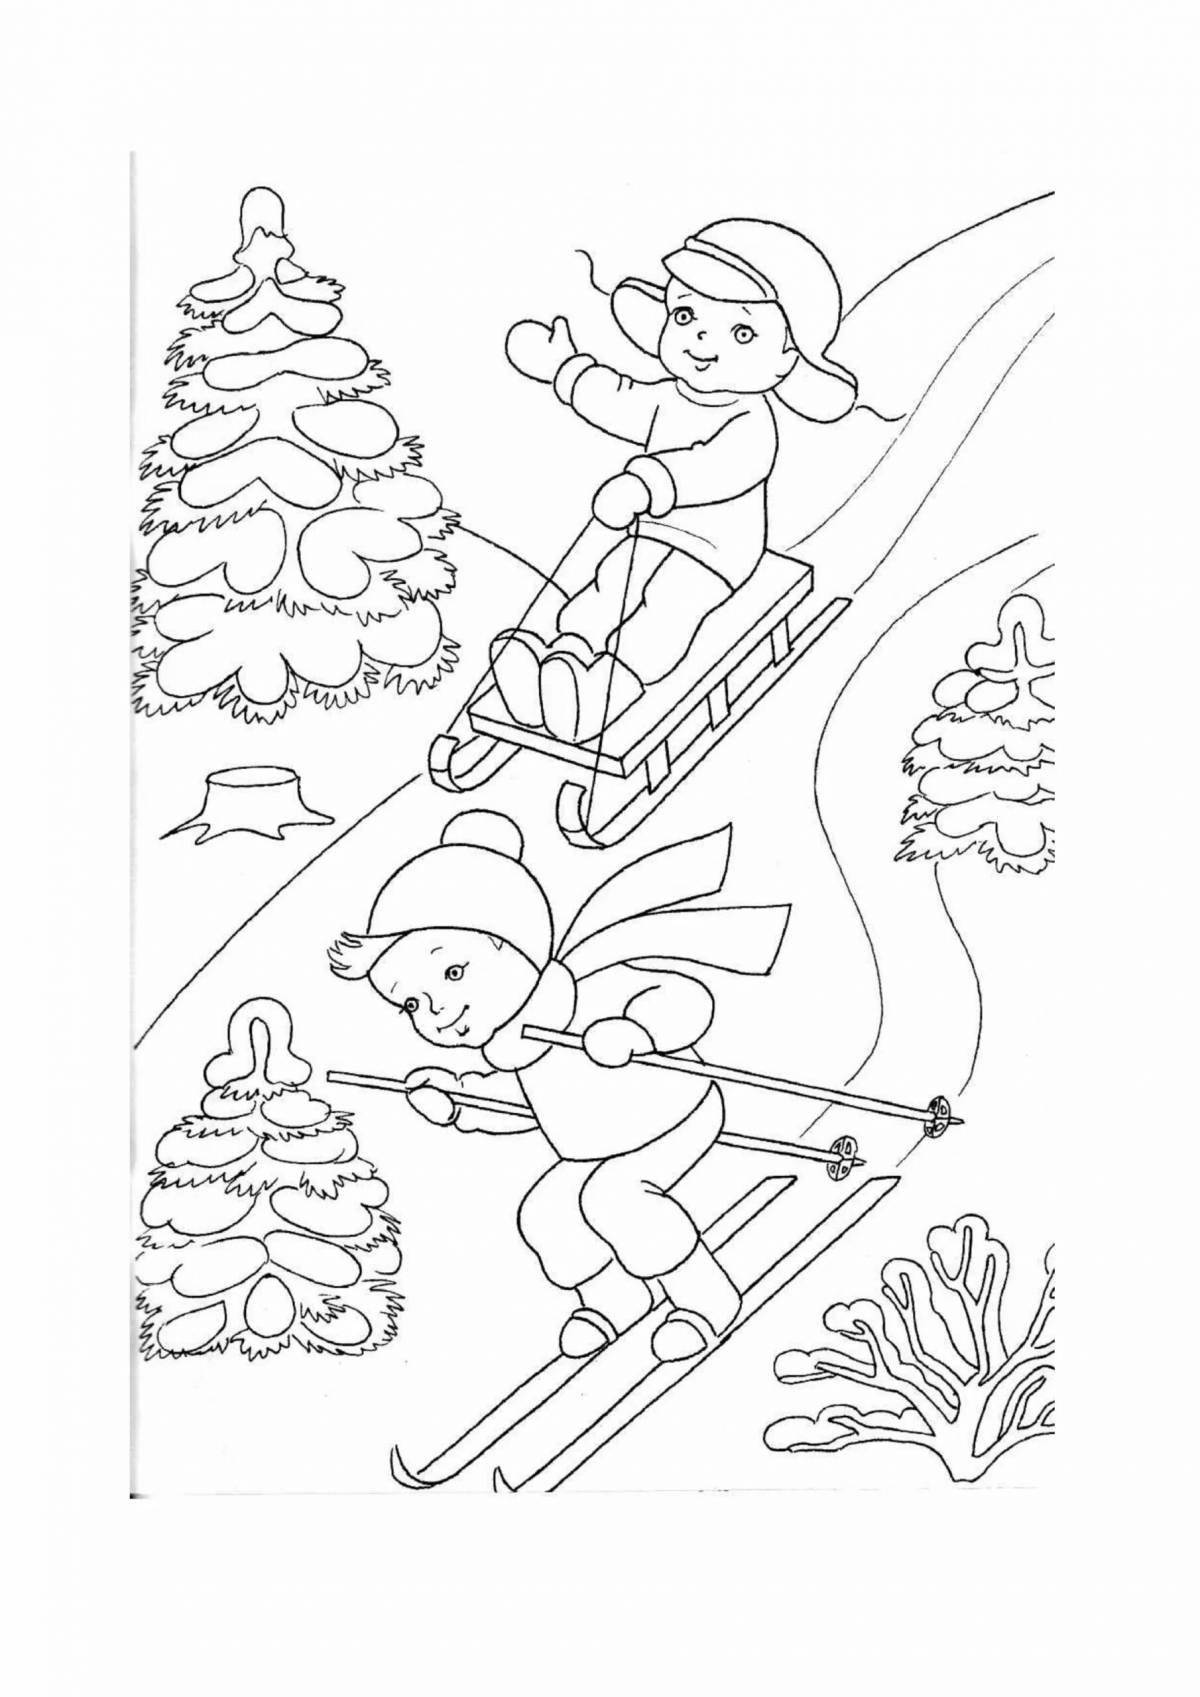 Fluffy winter coloring book